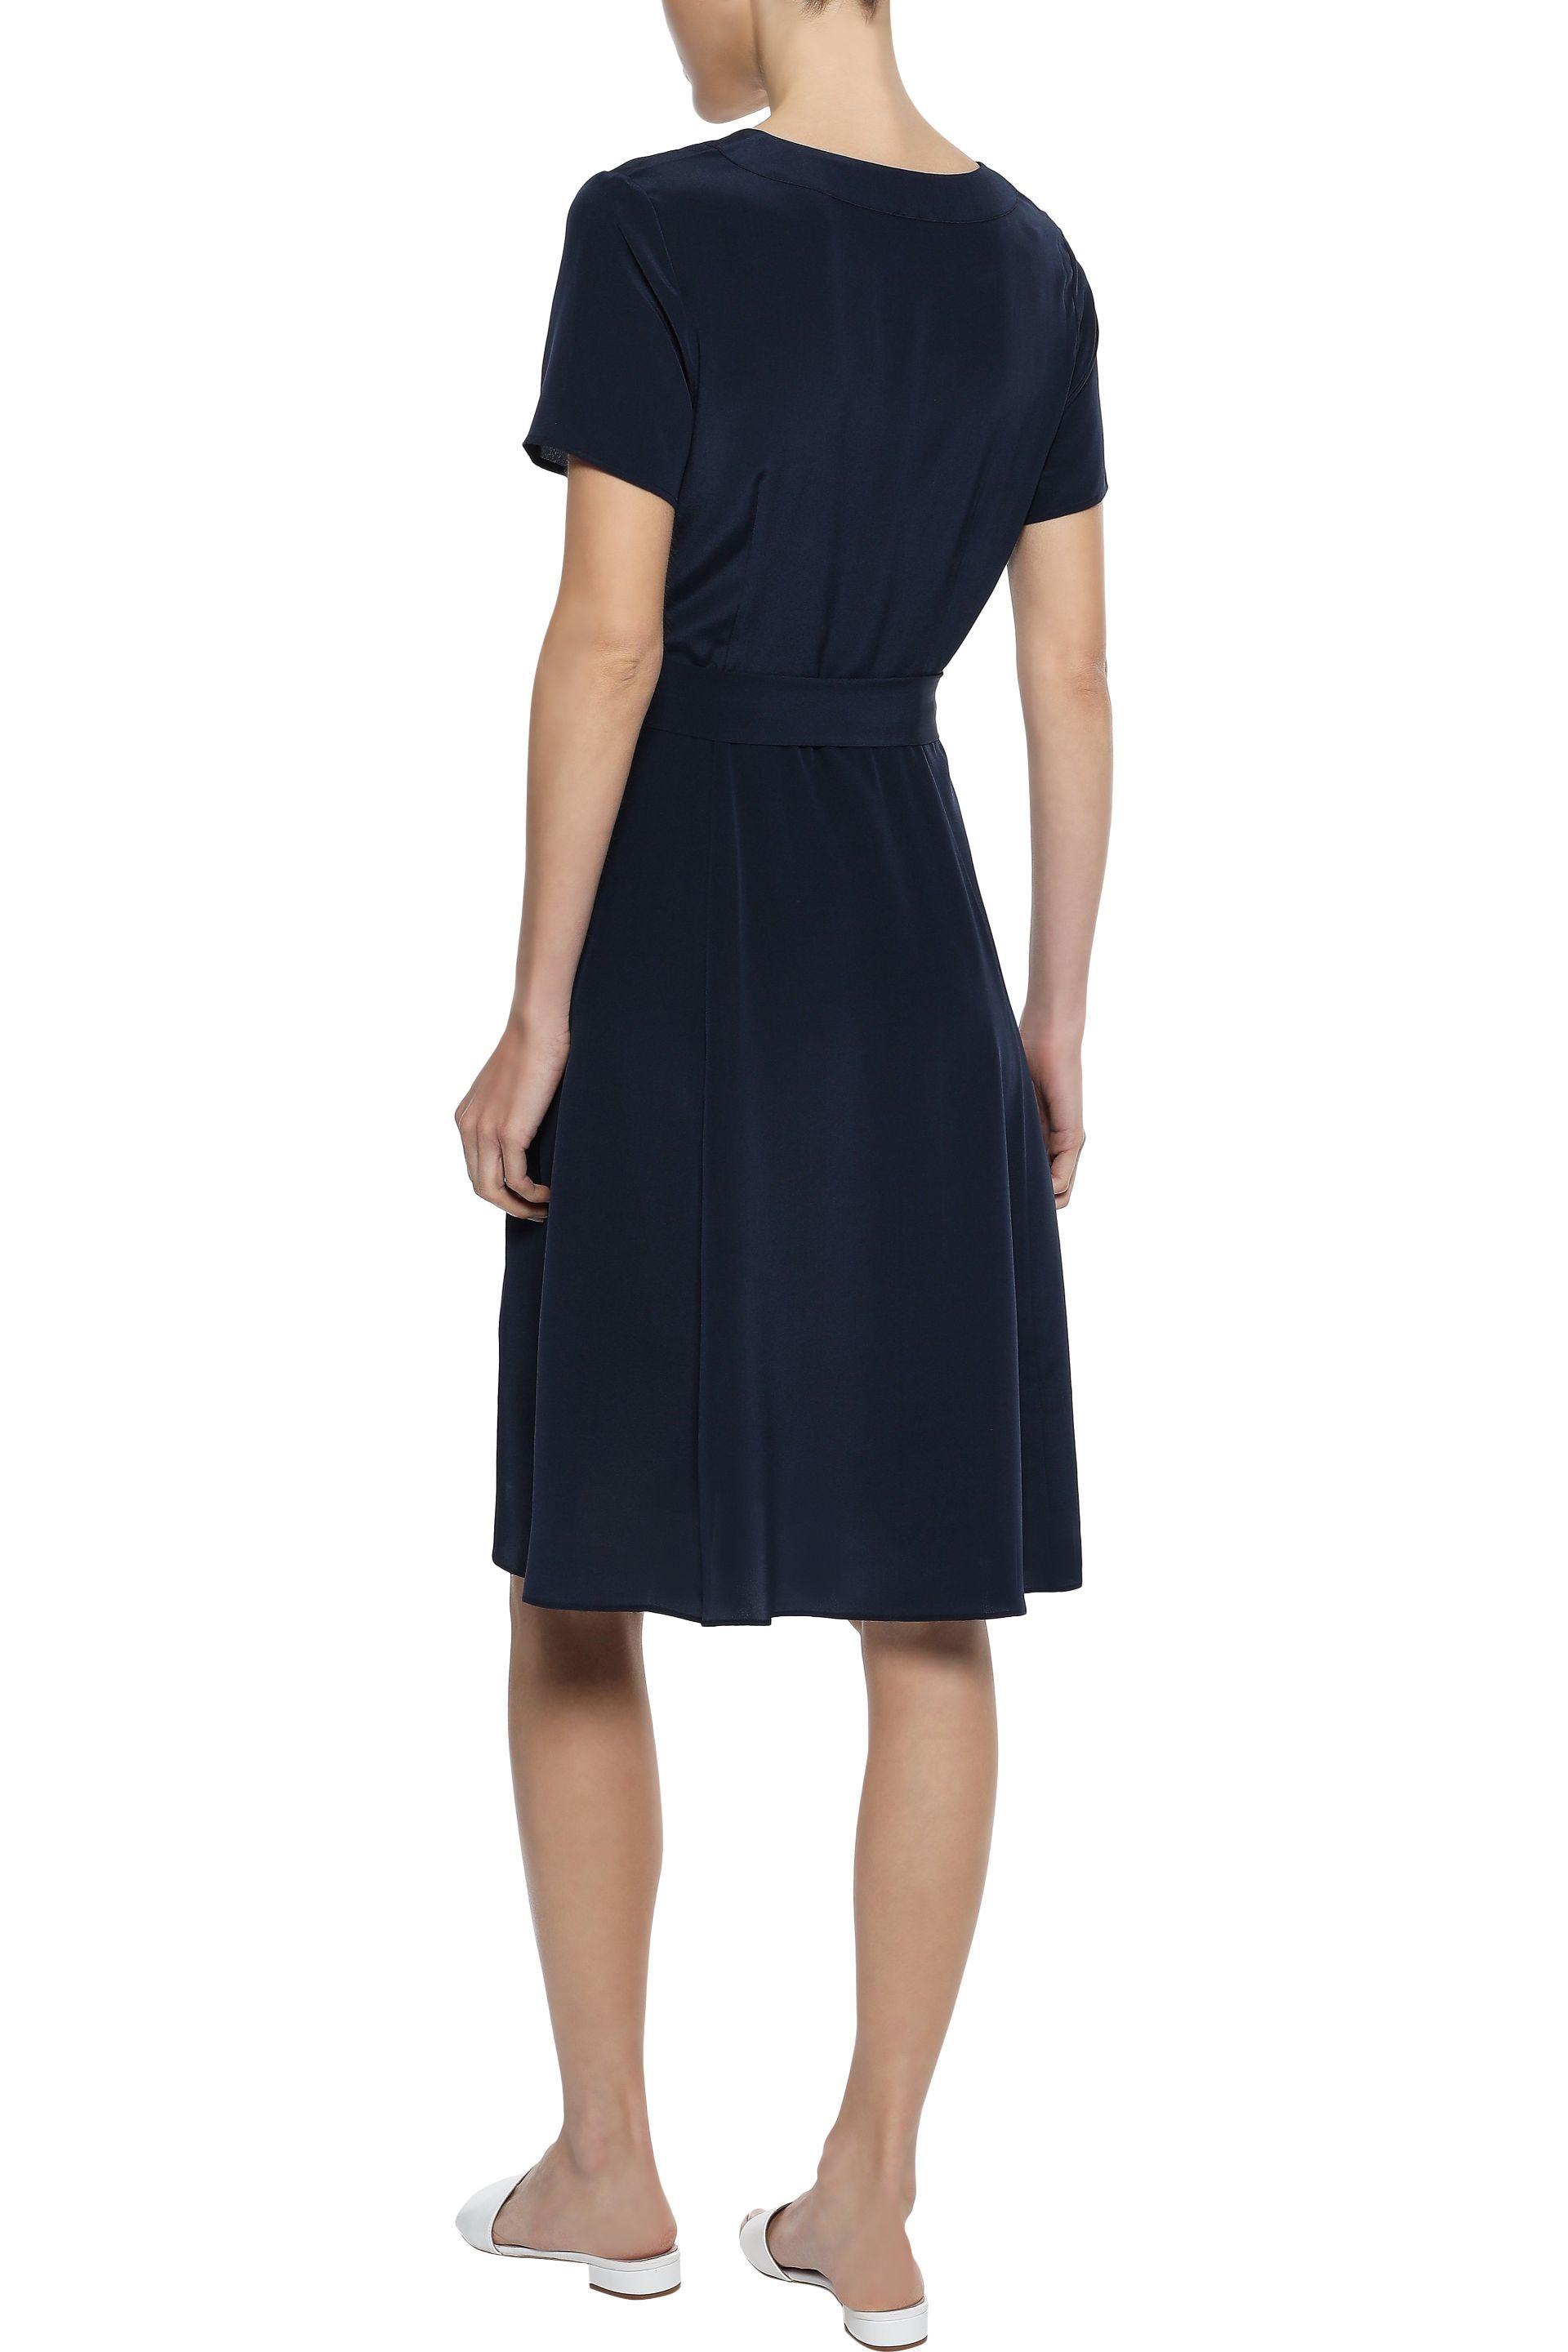 Iris & Ink Siv Belted Washed-silk Dress Navy in Blue - Lyst